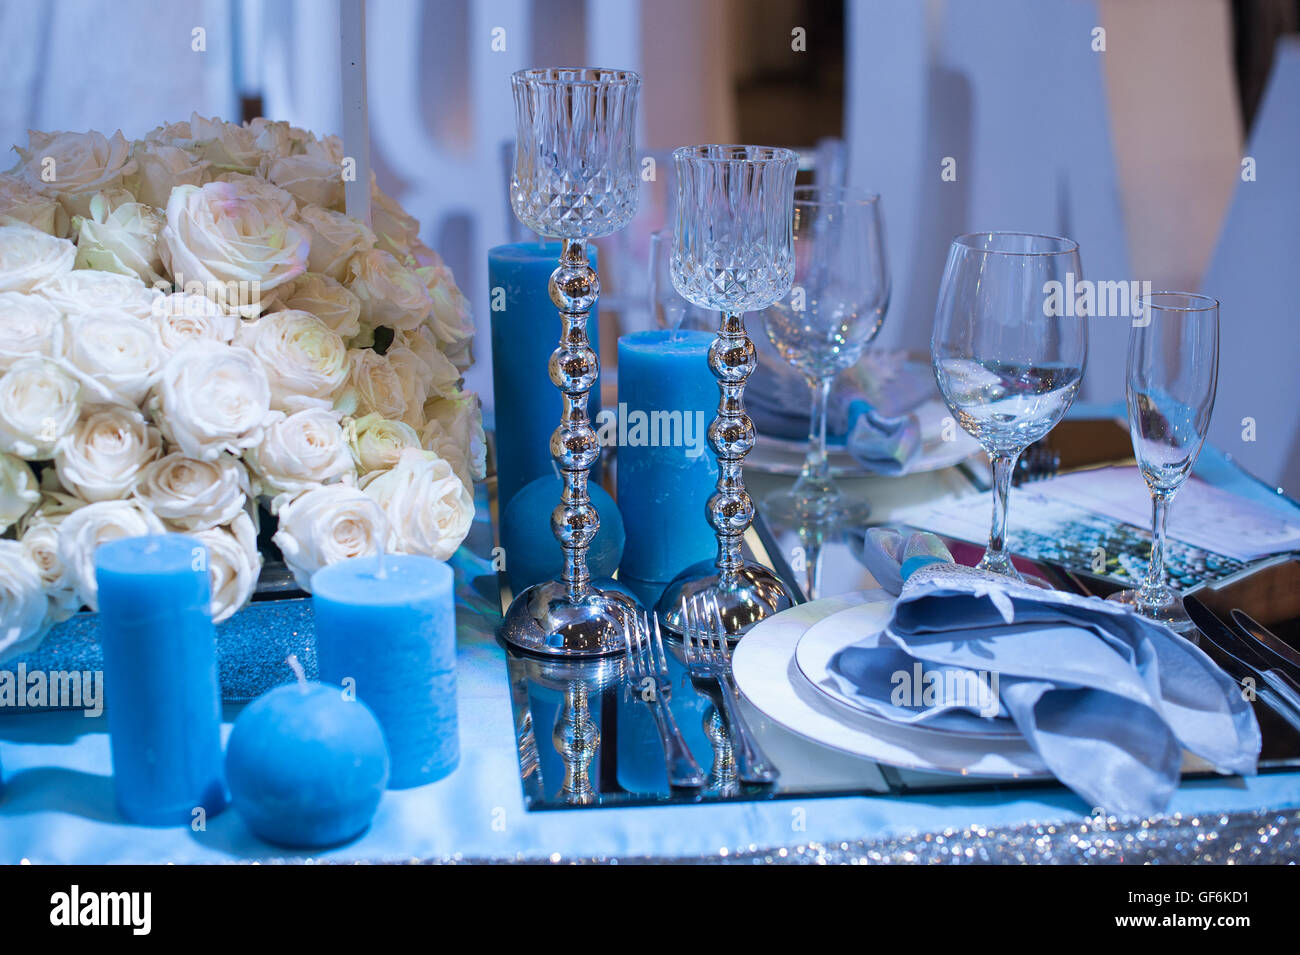 Wedding decor in blue. candles and flowers on the table Stock Photo